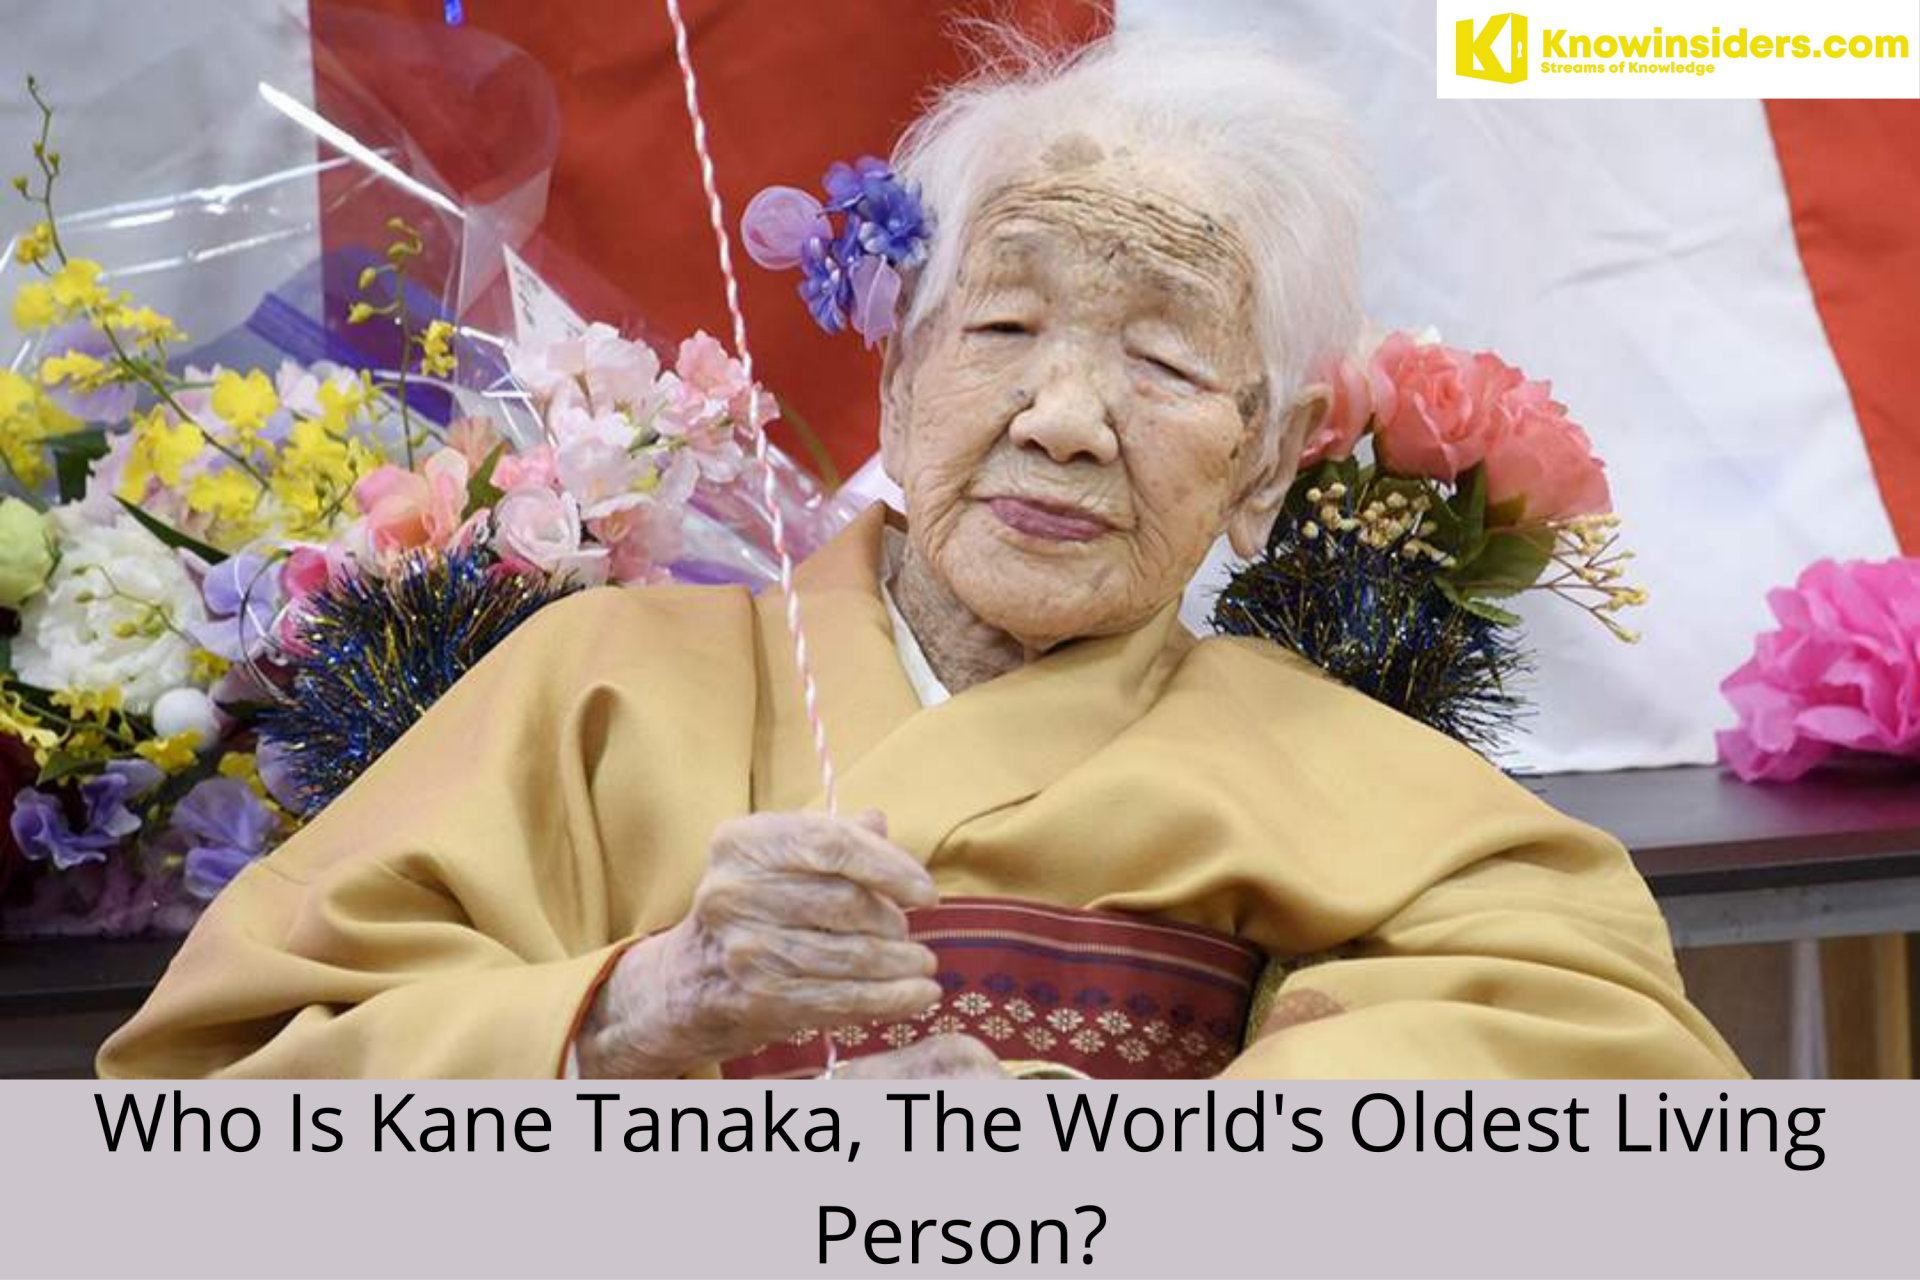 Who Is Kane Tanaka - The World's Oldest Living Person